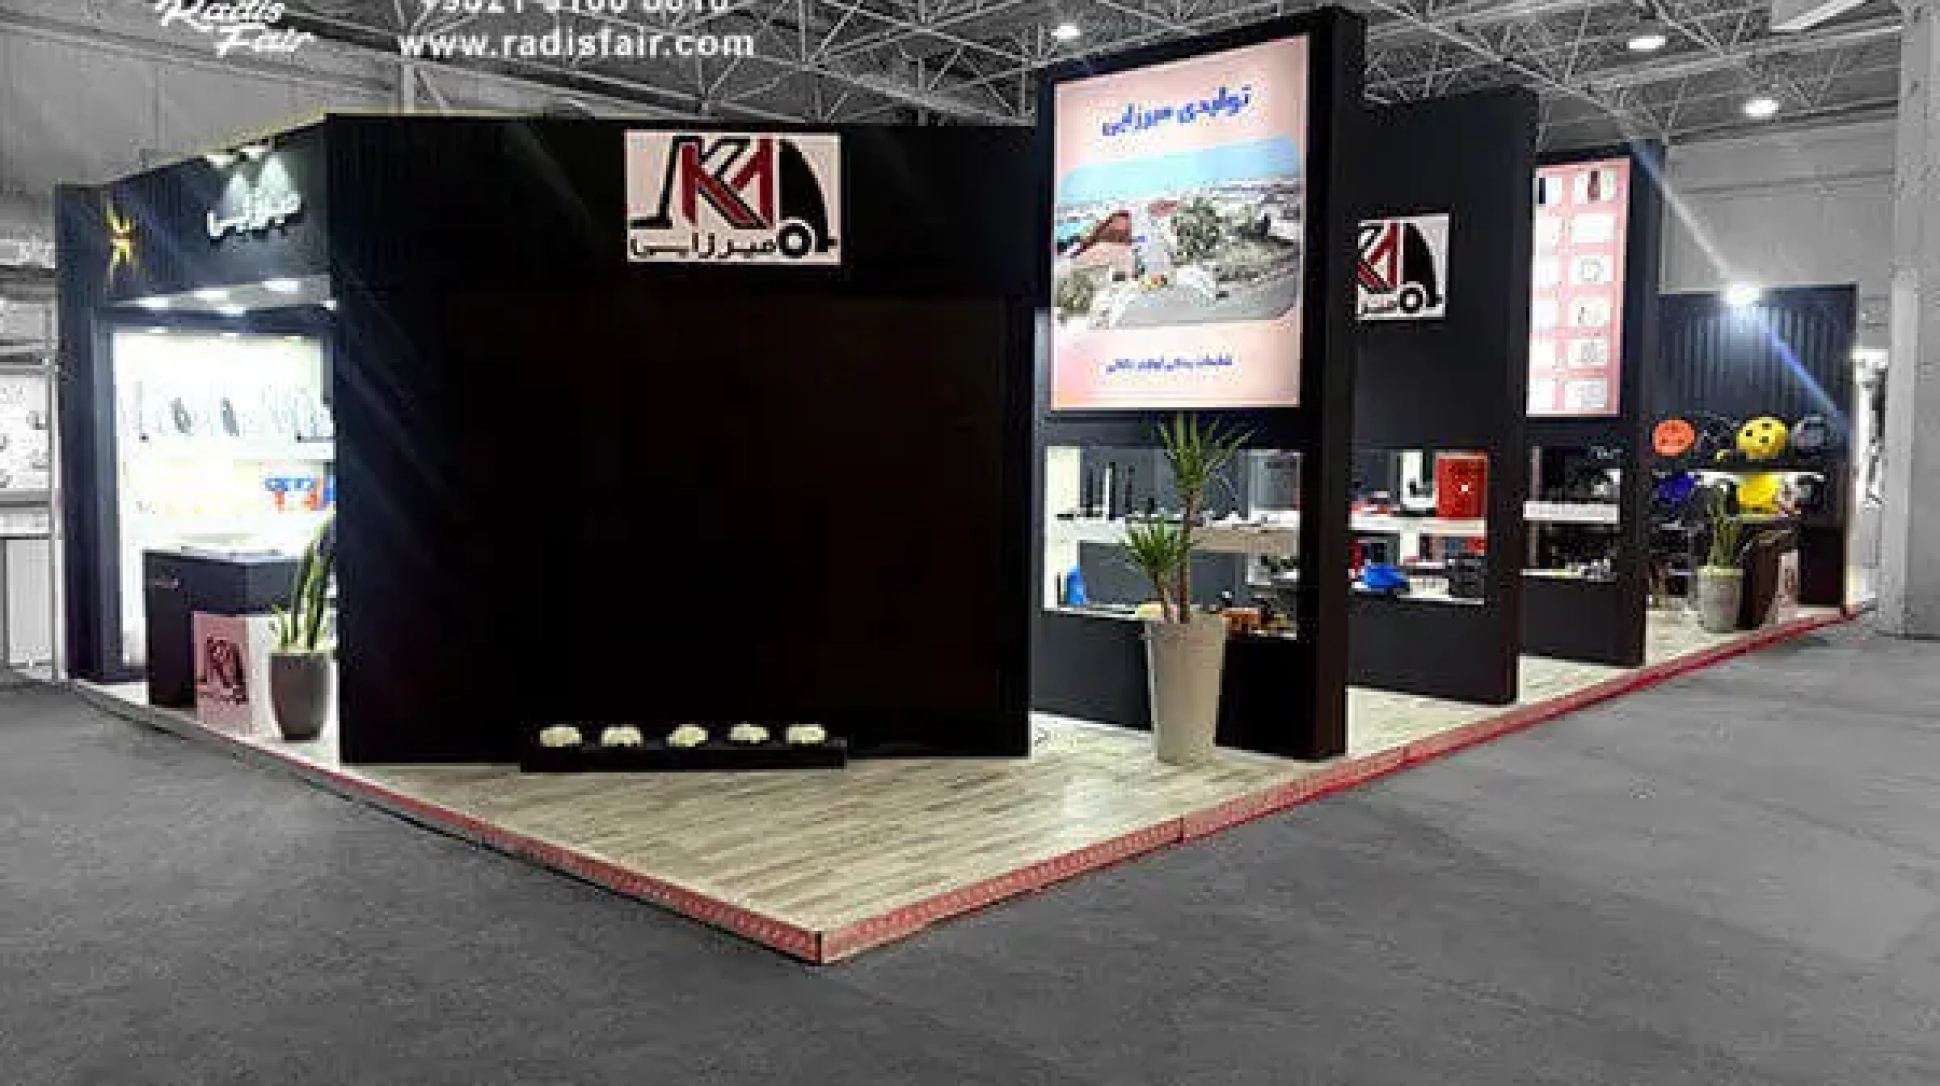 mirzaie-co-stand-construction-iran-hamex-exhibition